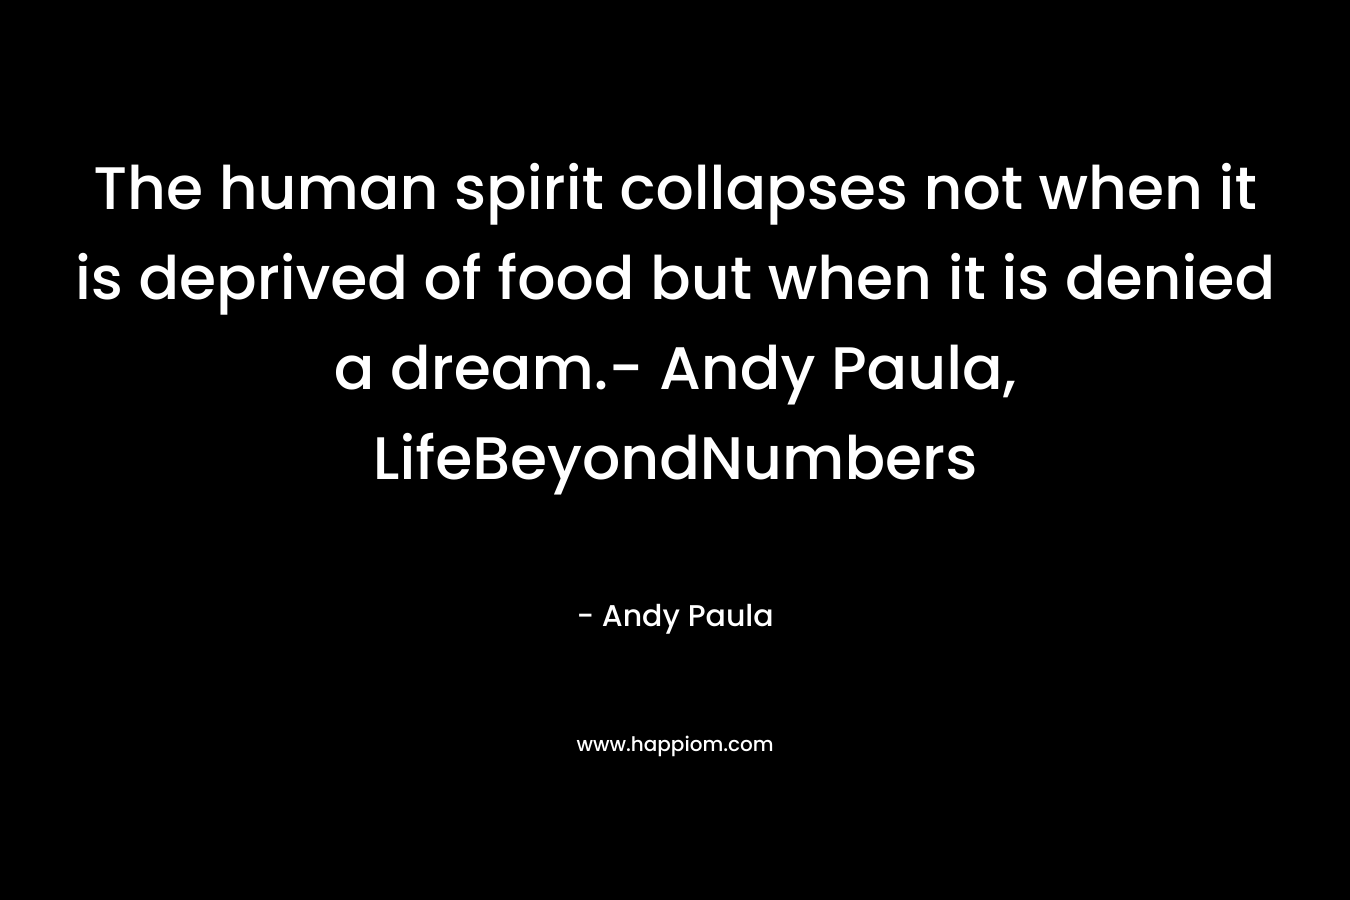 The human spirit collapses not when it is deprived of food but when it is denied a dream.- Andy Paula, LifeBeyondNumbers